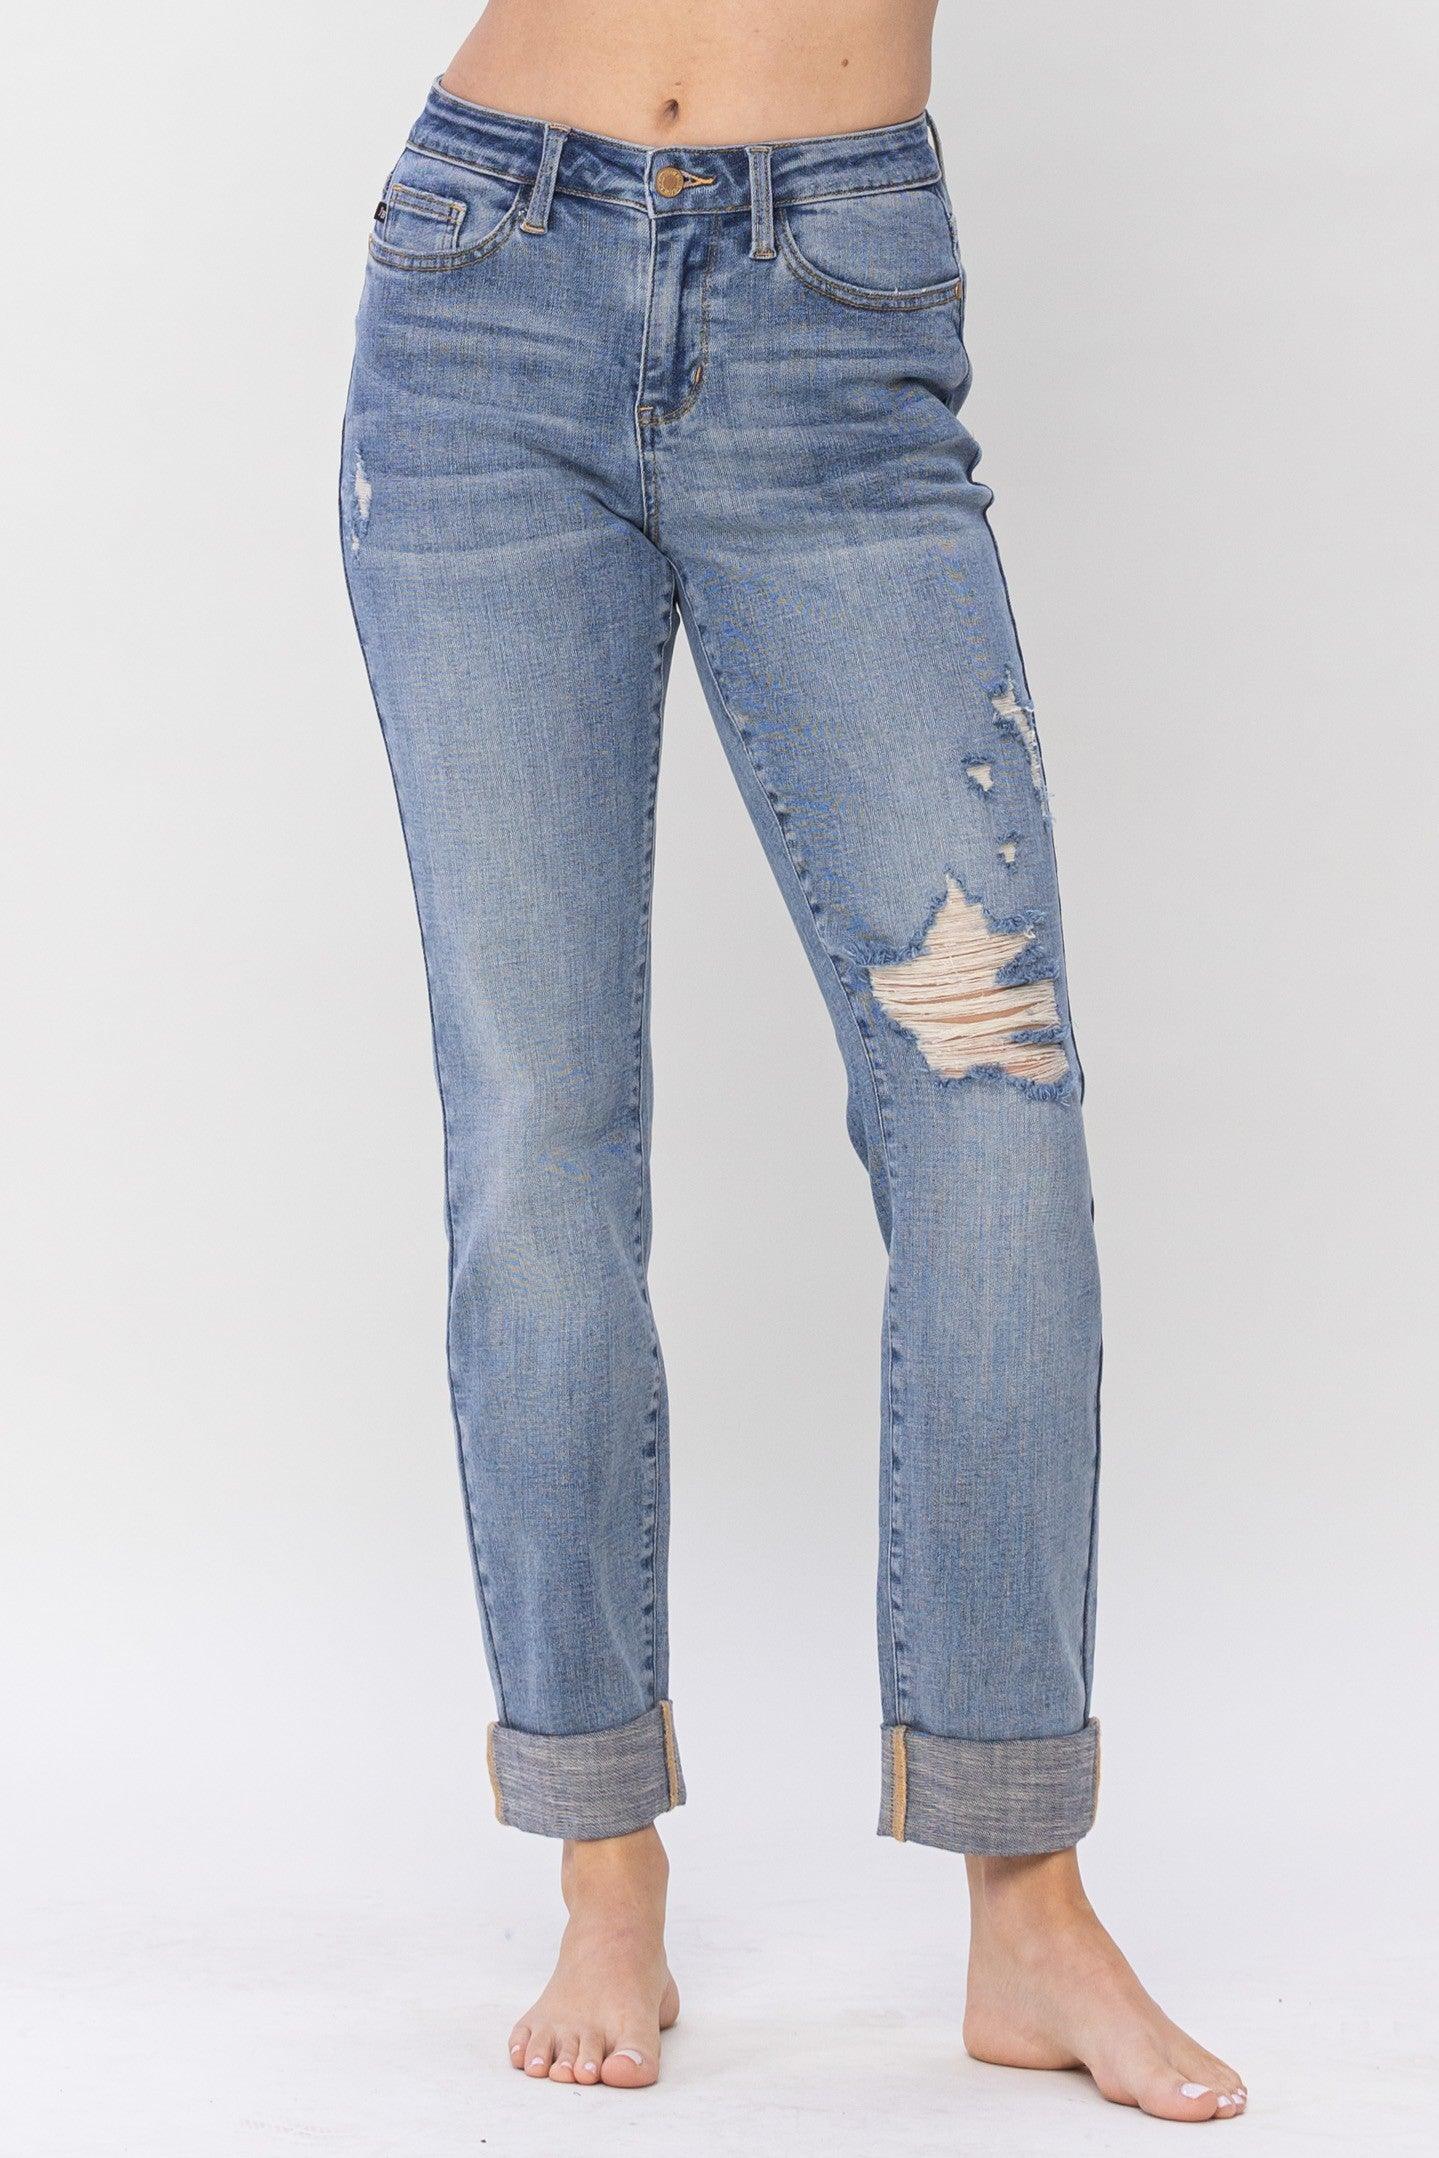 Judy Blue Midrise with Knee Destroy and Cuffed Long Boyfriend Jeans - Doodlations Coffee Bar & Boutique